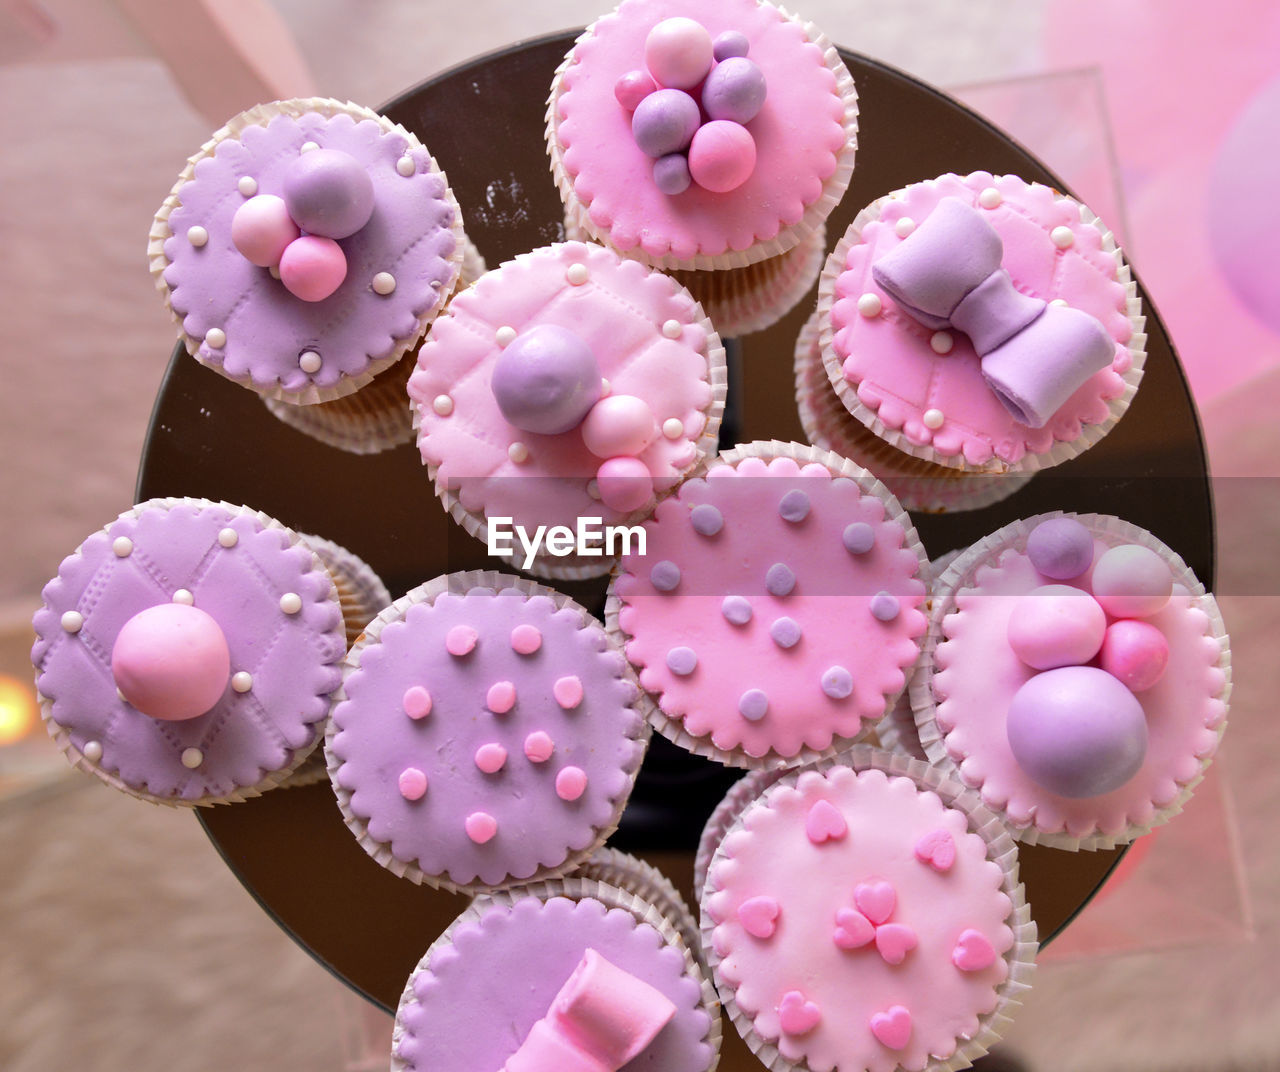 HIGH ANGLE VIEW OF PINK CUPCAKES ON TABLE